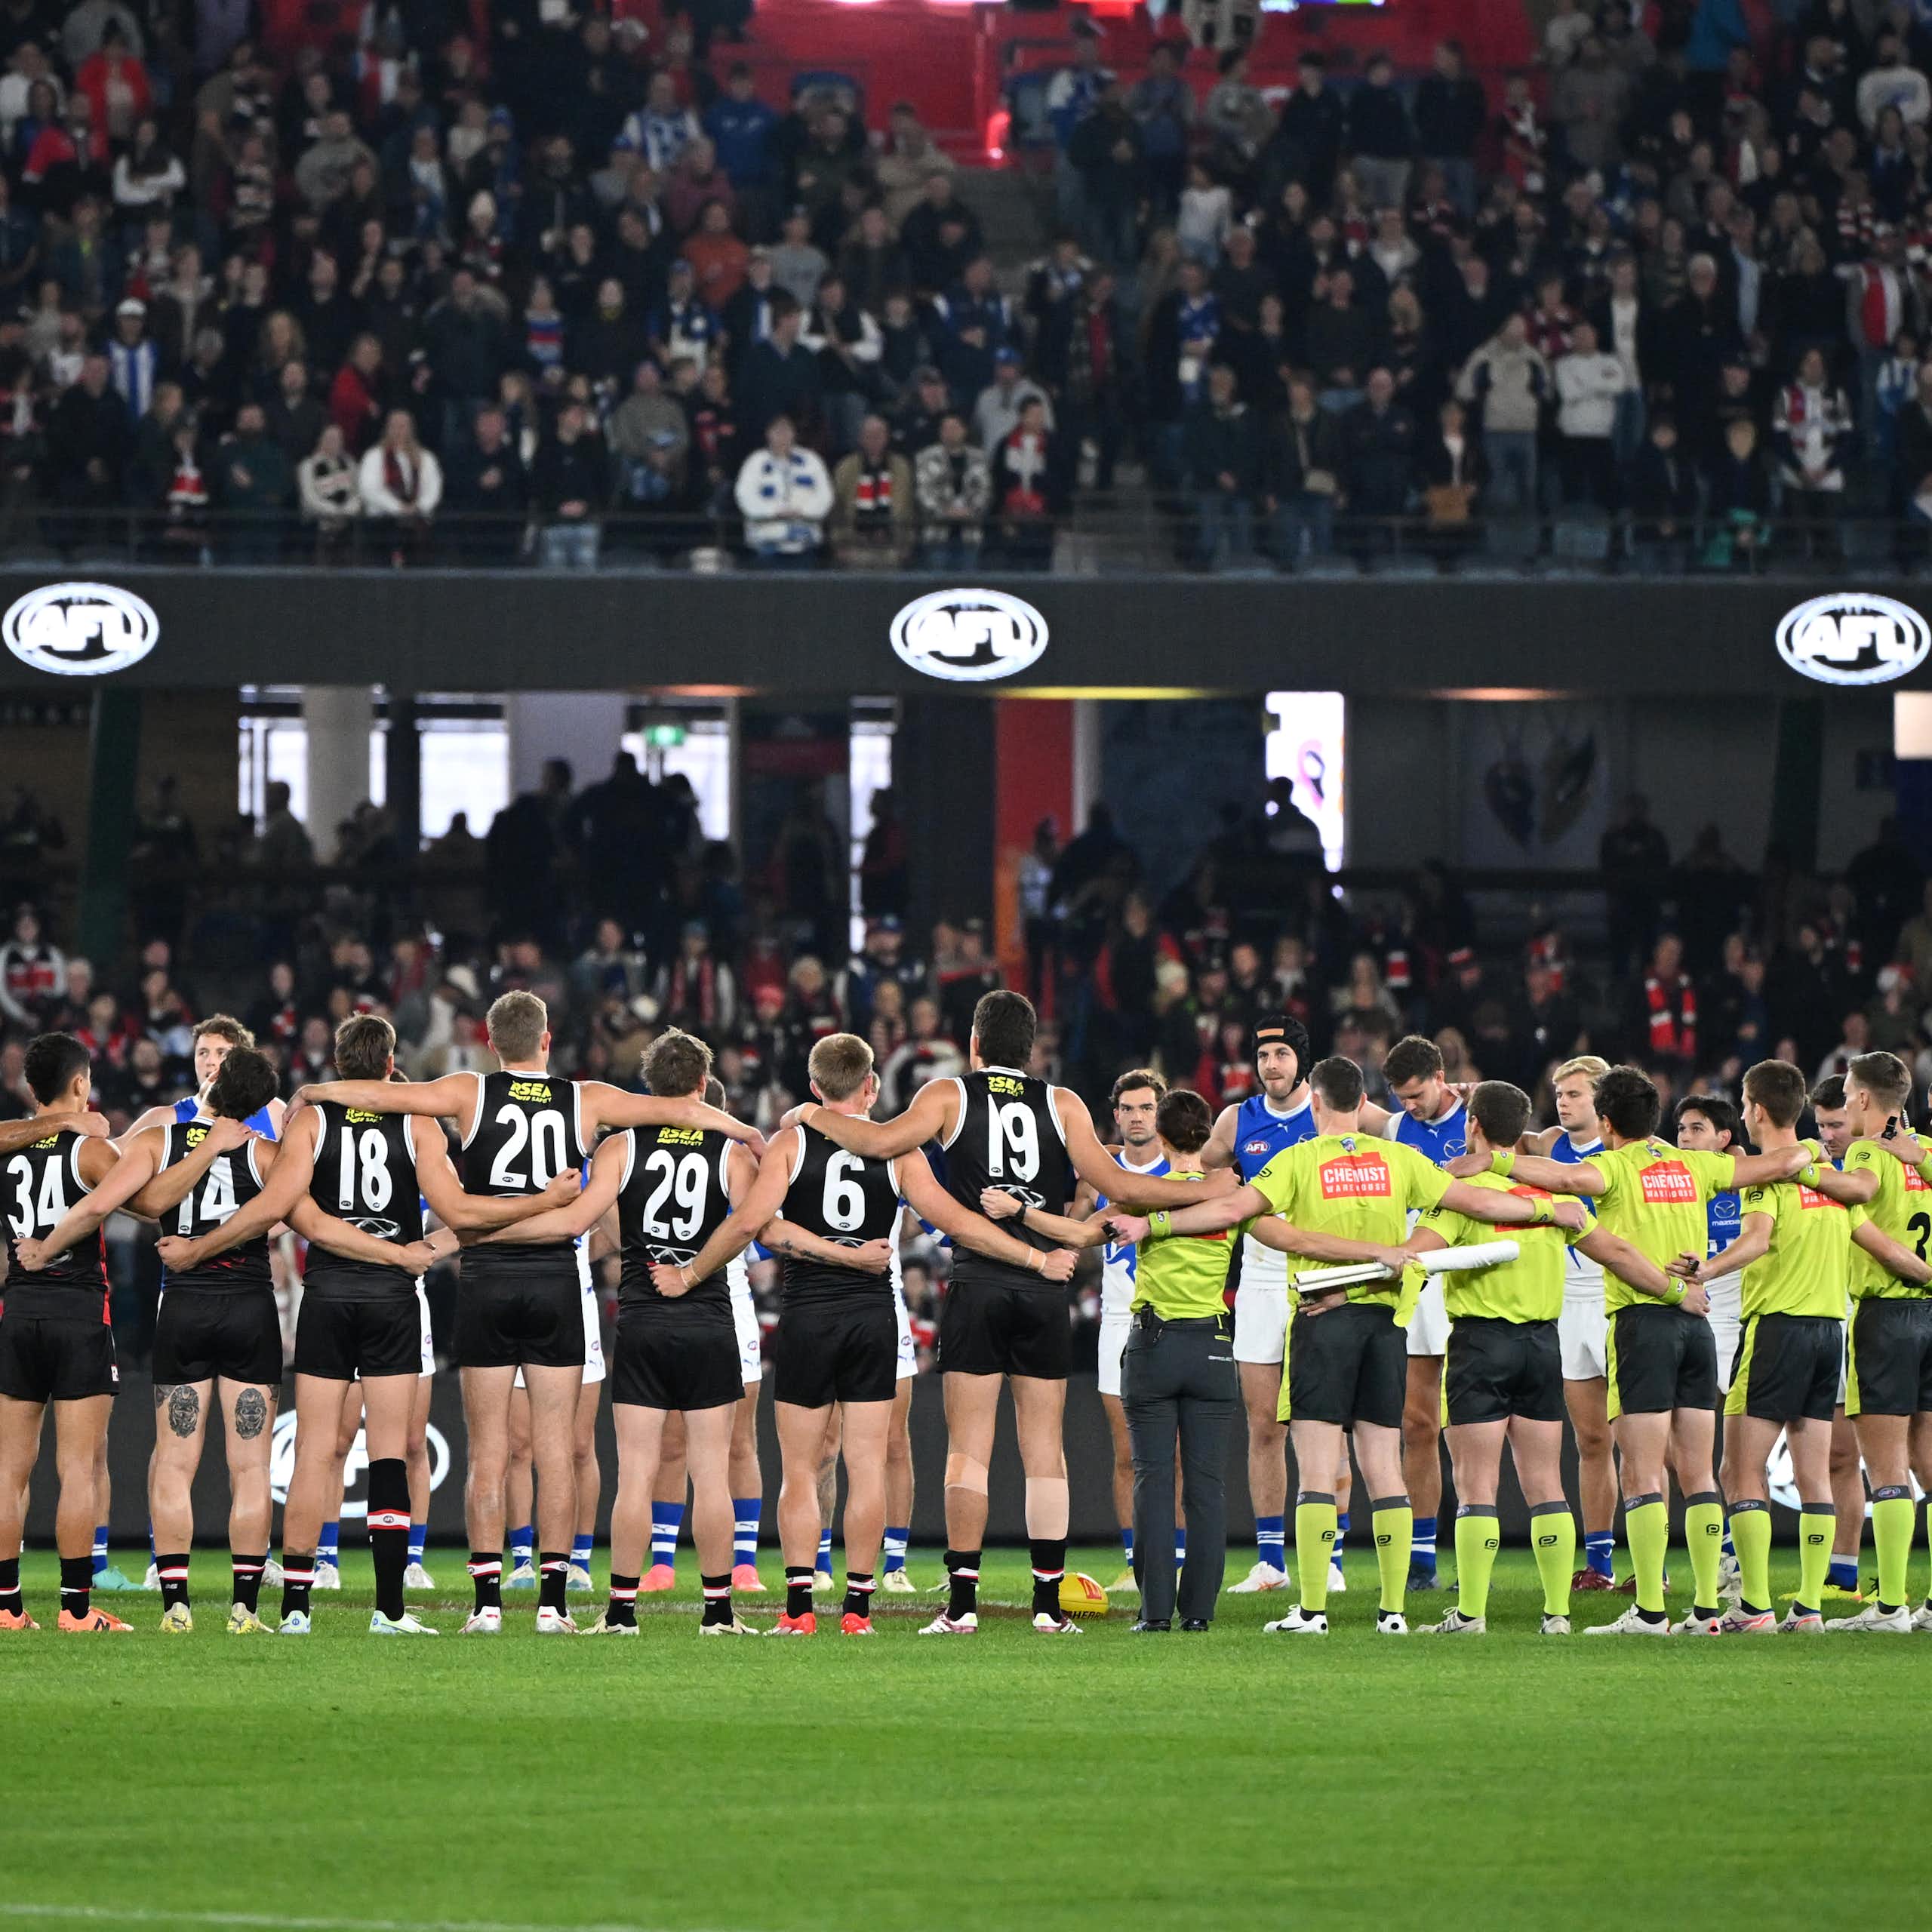 Players and umpires link arms for a moment of silence for victims of gender-based violence ahead of a Round 8 AFL game